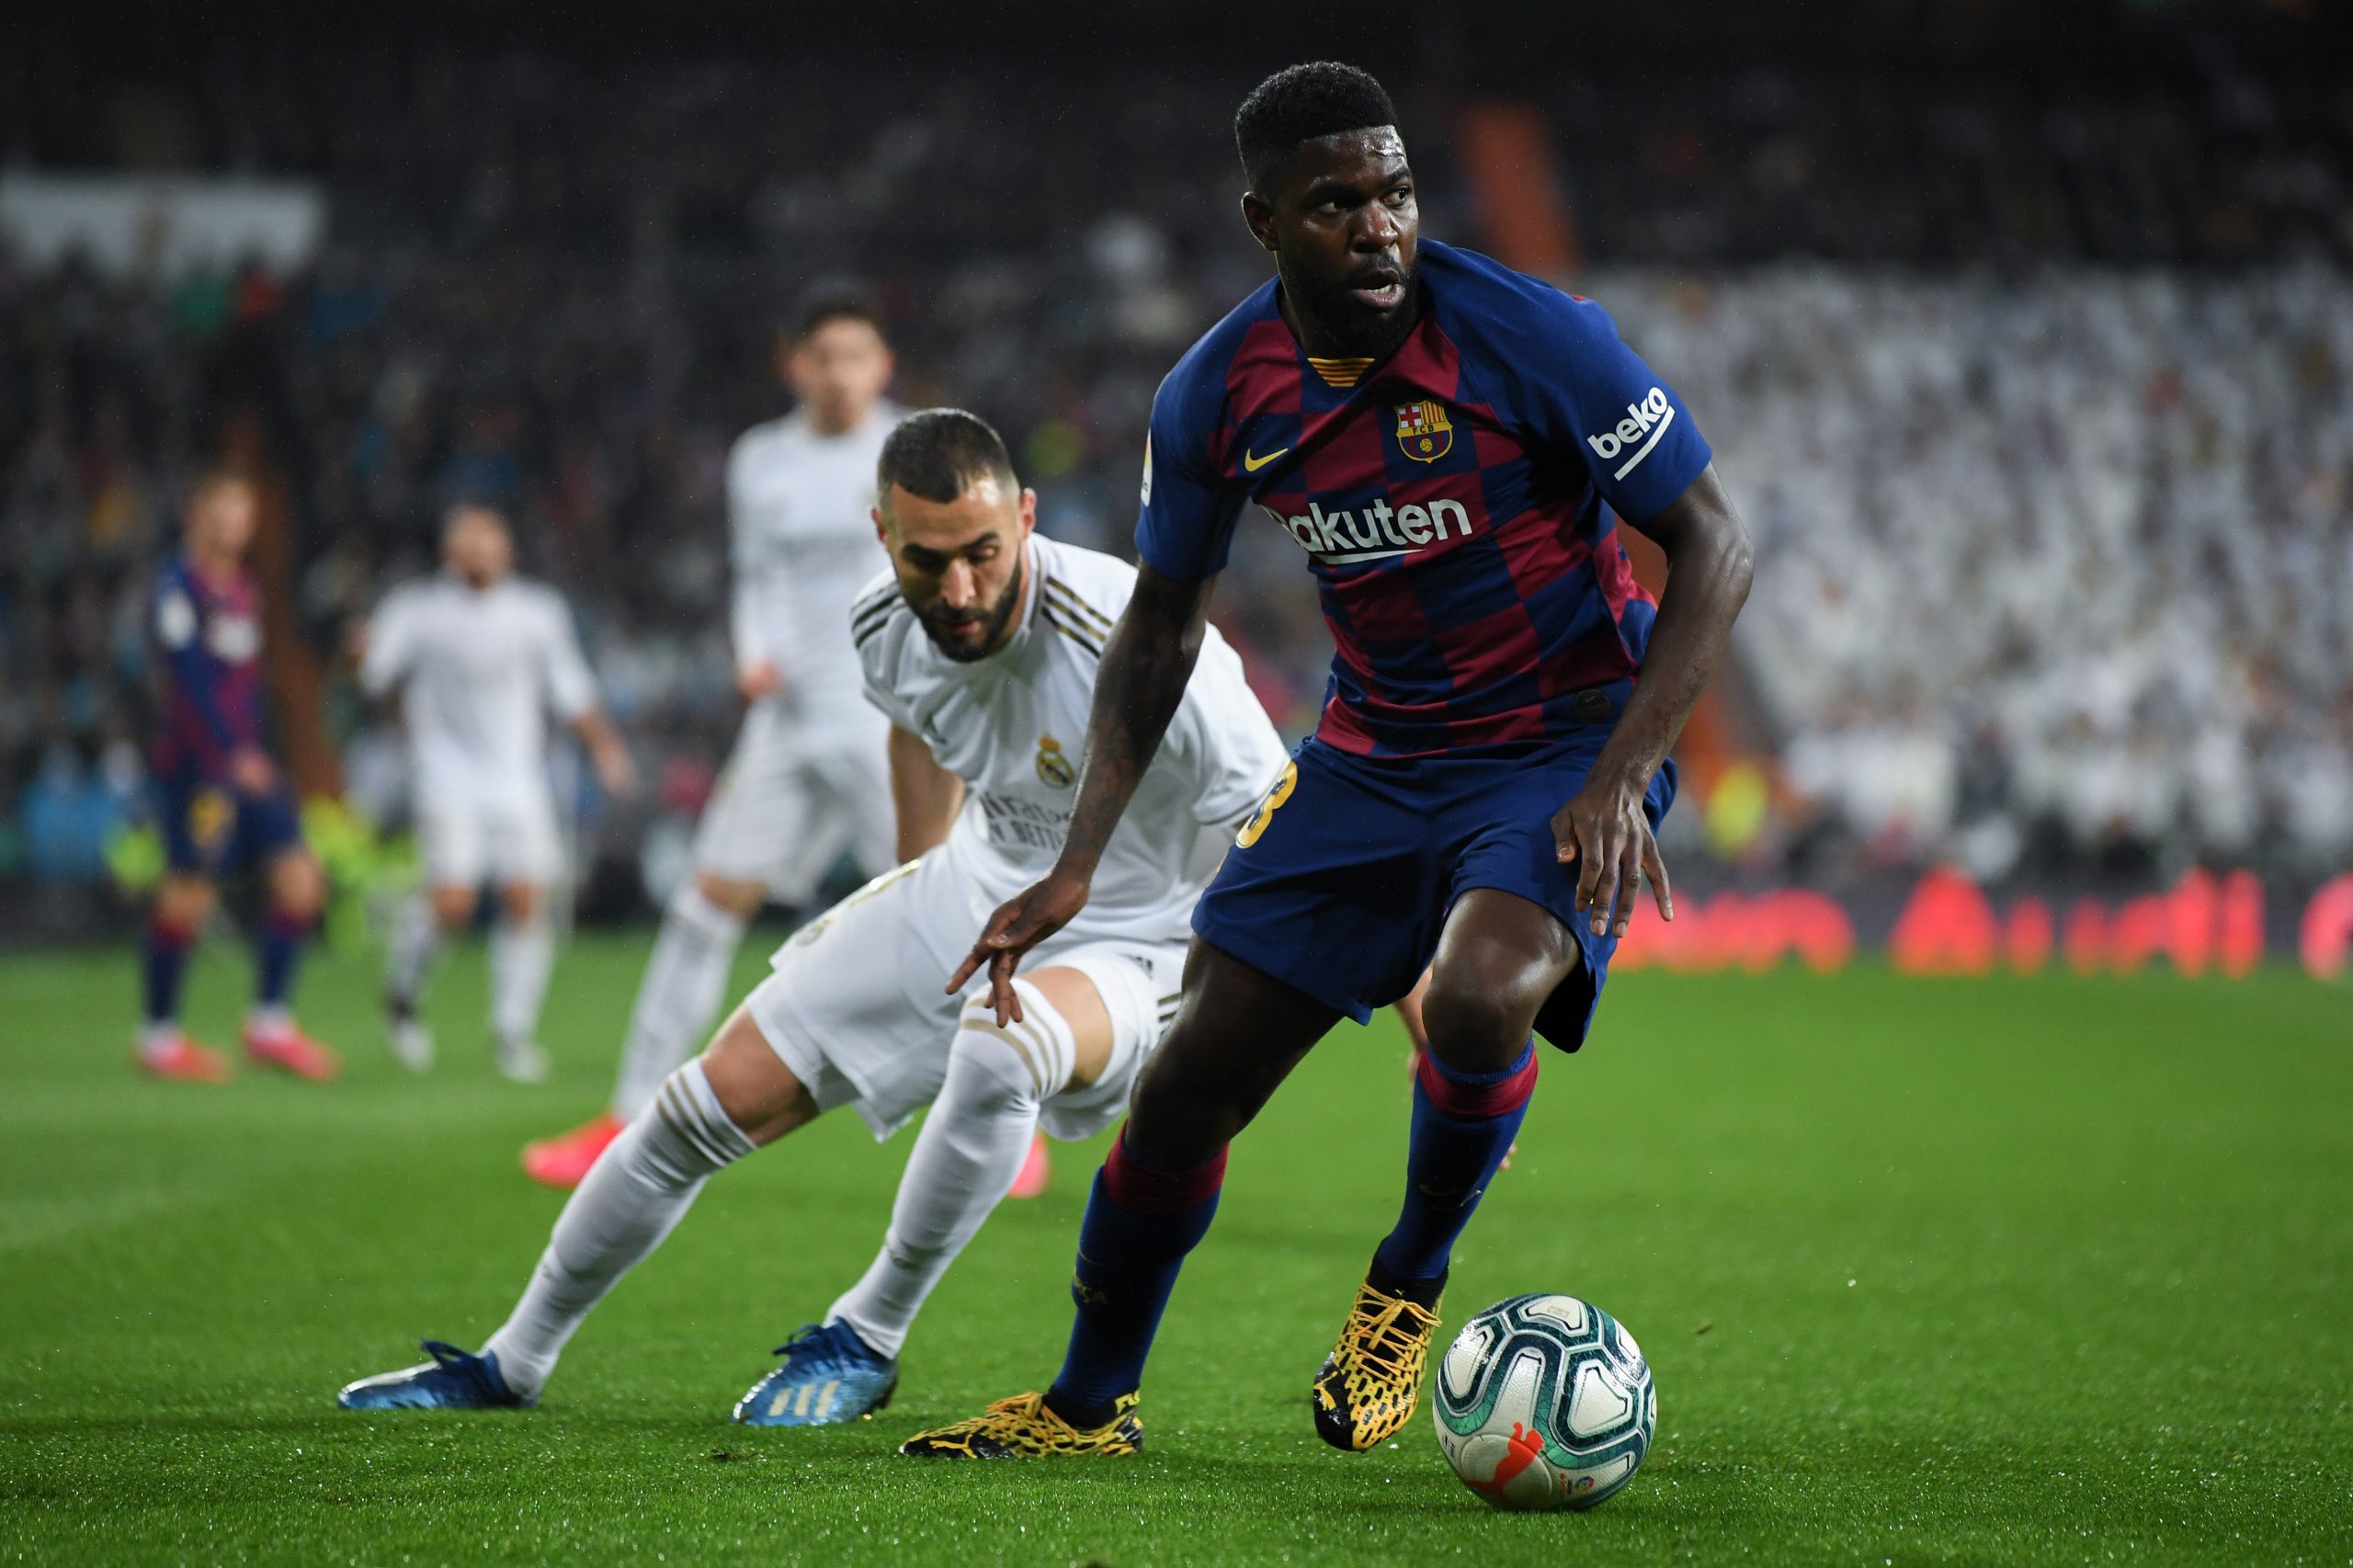 Barcelona willing to sell Umtiti this summer (Umtiti is seen in the picture)